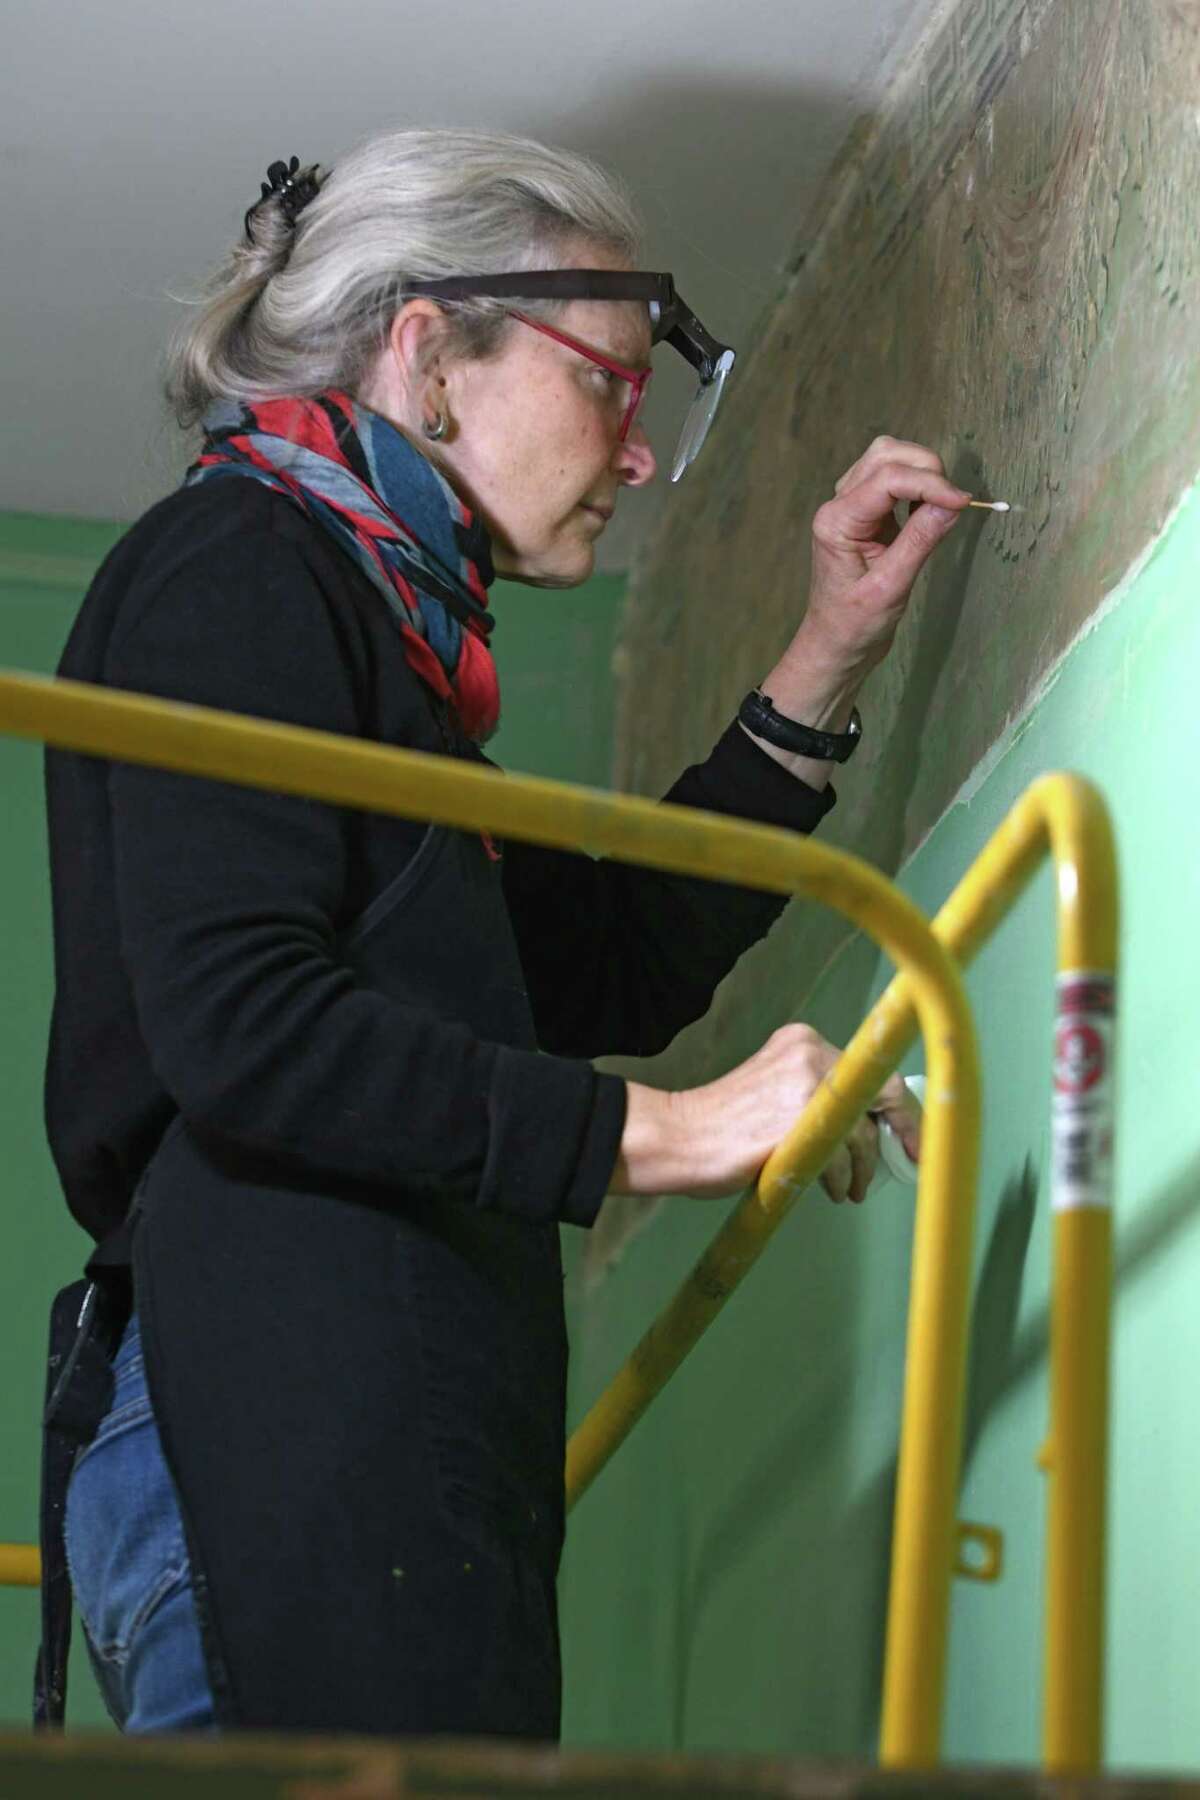 Conservator Margaret Saliske works on restoring the long lost paintings by Thomas Cole at the Thomas Cole Historic Site on Wednesday, Nov. 23, 2016 in Catskill, N.Y. Senator Charles Schumer recently secured over $600,000 to restore the lost American treasures. (Lori Van Buren / Times Union)